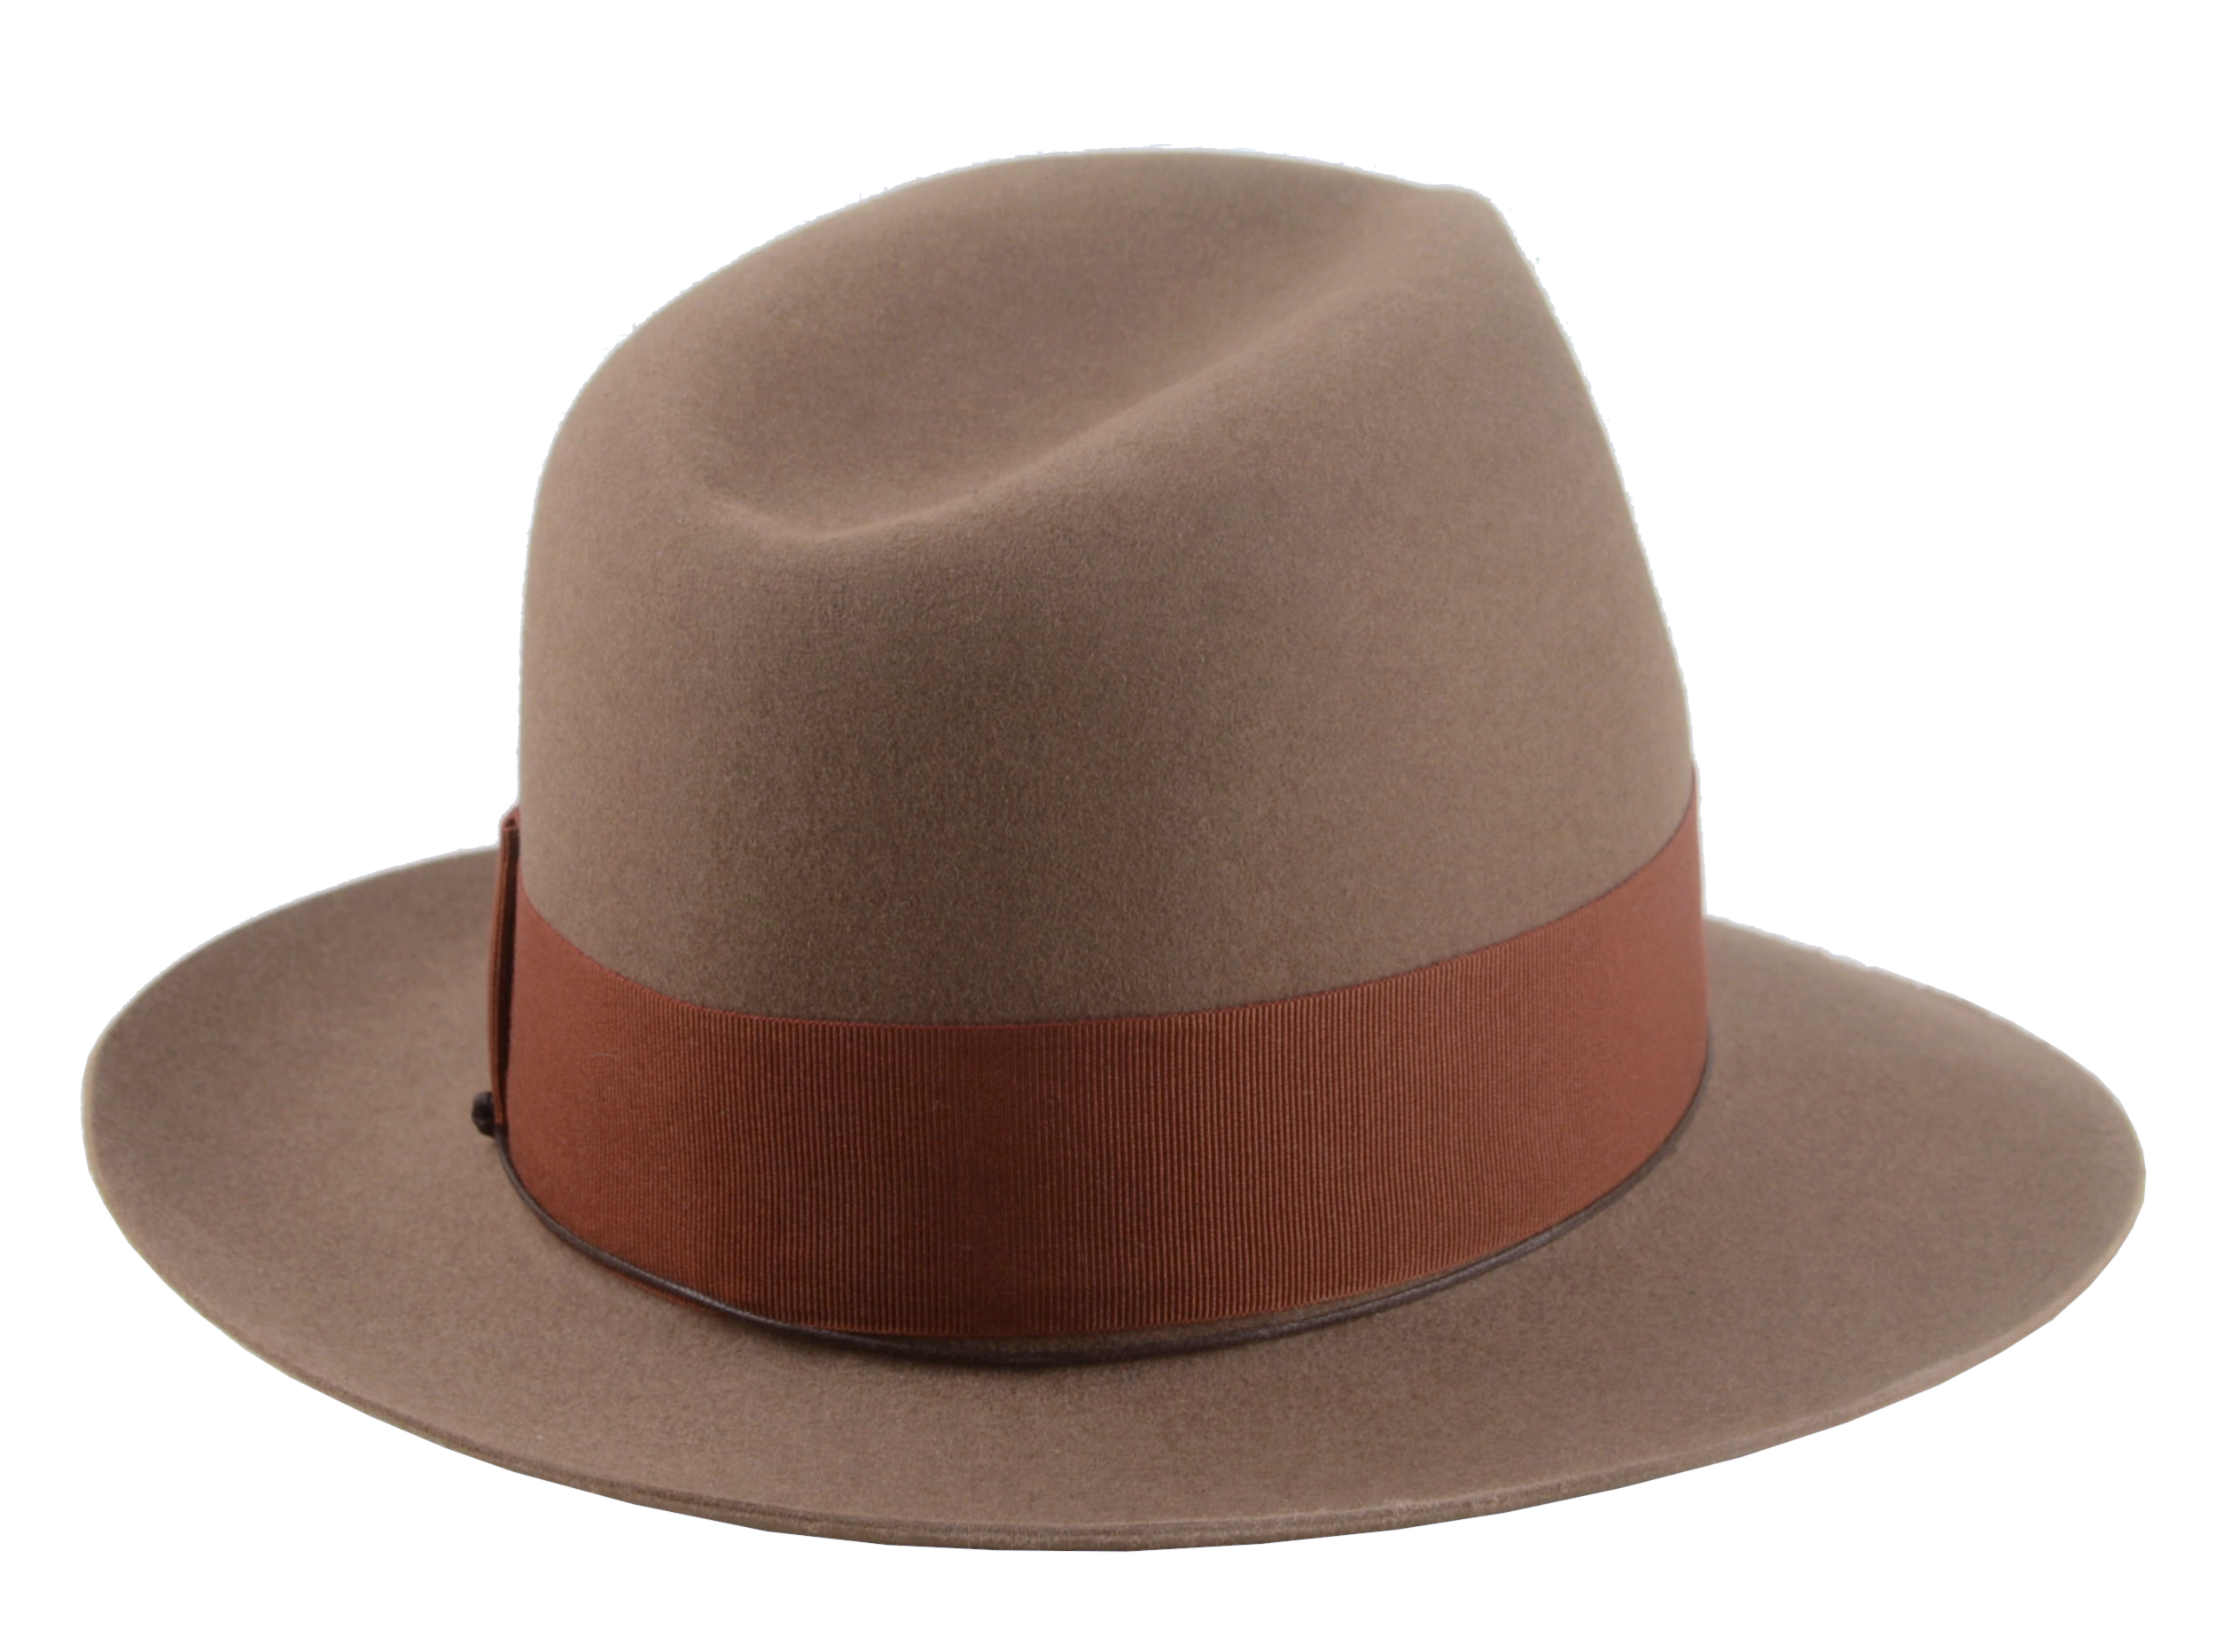 Right angle view of the Pharaoh explorer fedora showcasing its elegant 5 1/2" crown height